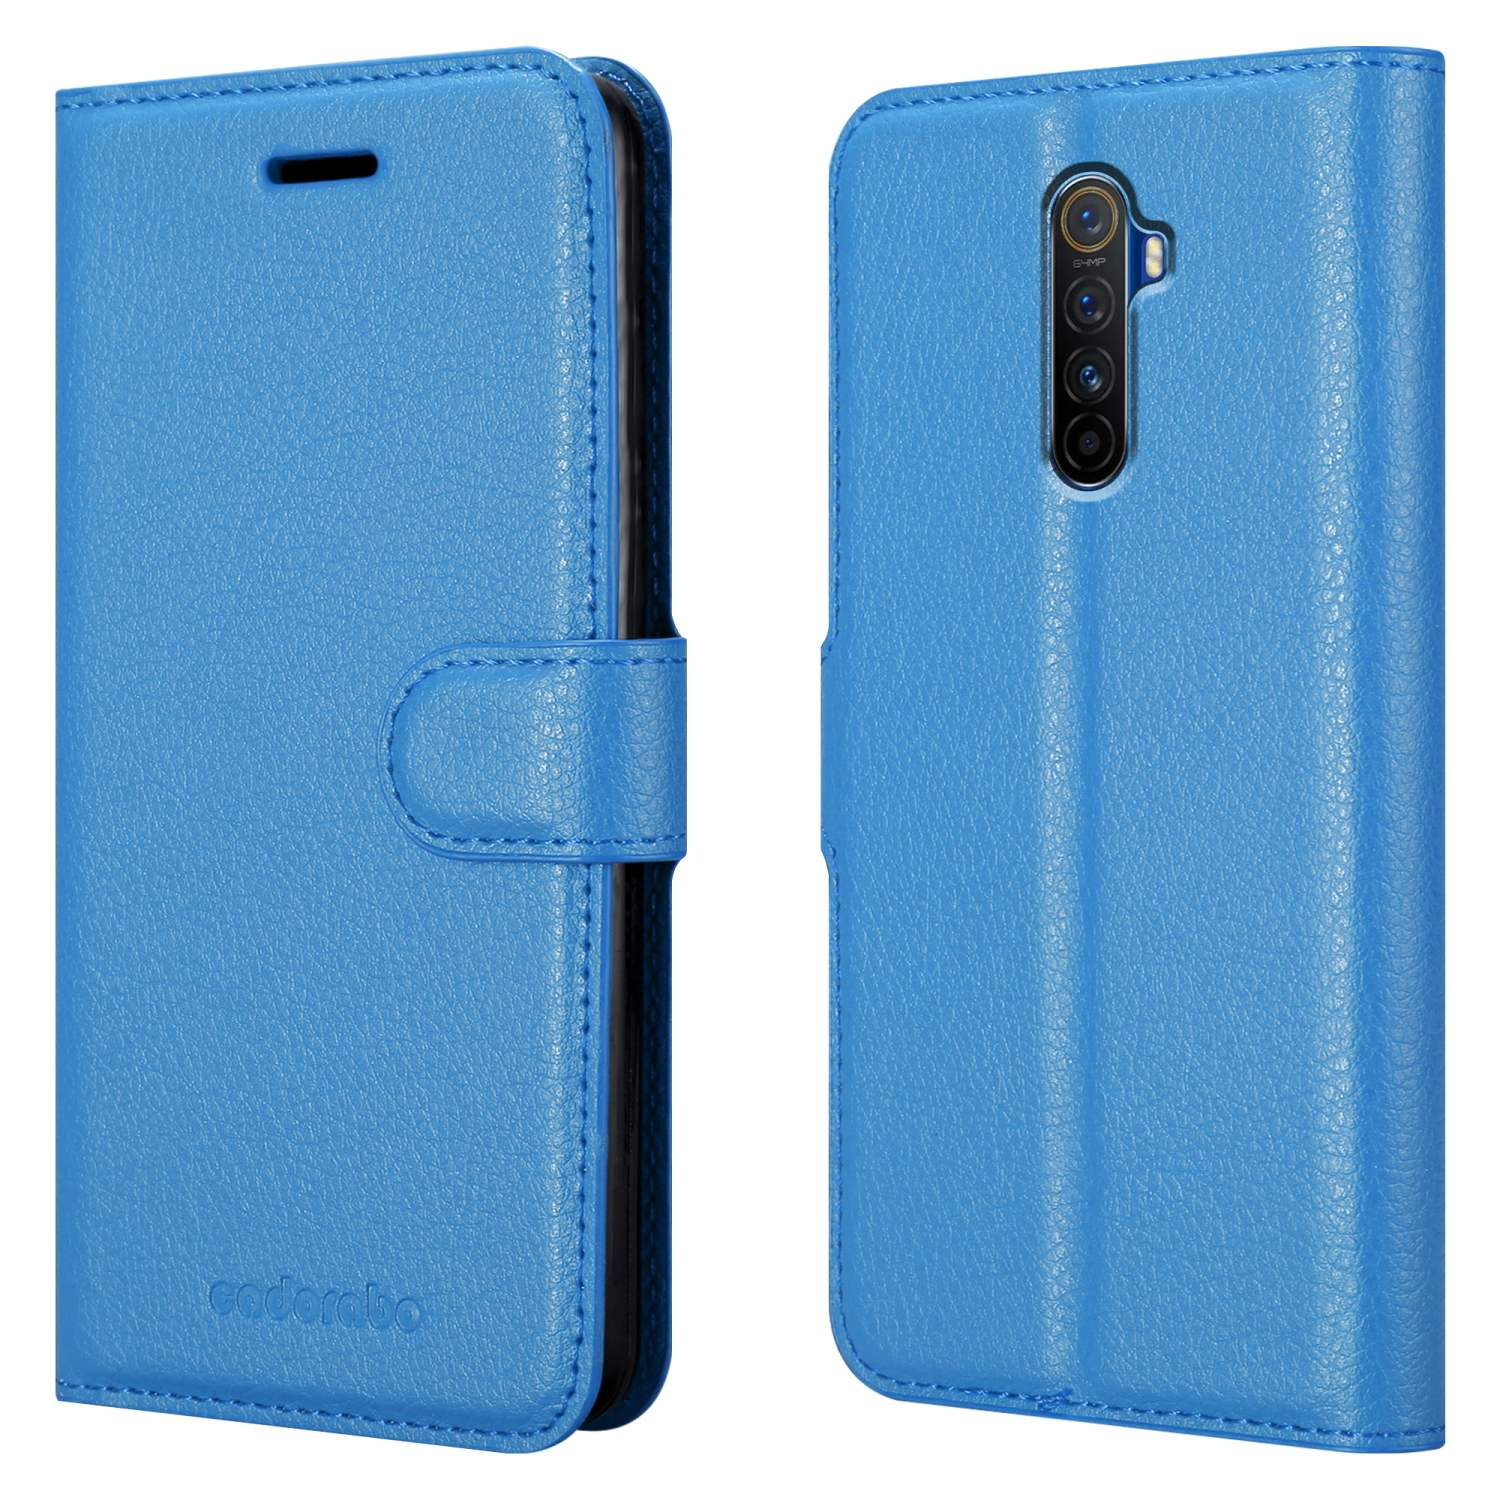 / Bookcover, Standfunktion, Hülle CADORABO PASTELL BLAU Reno PRO X2 Book Ace, Oppo Realme,